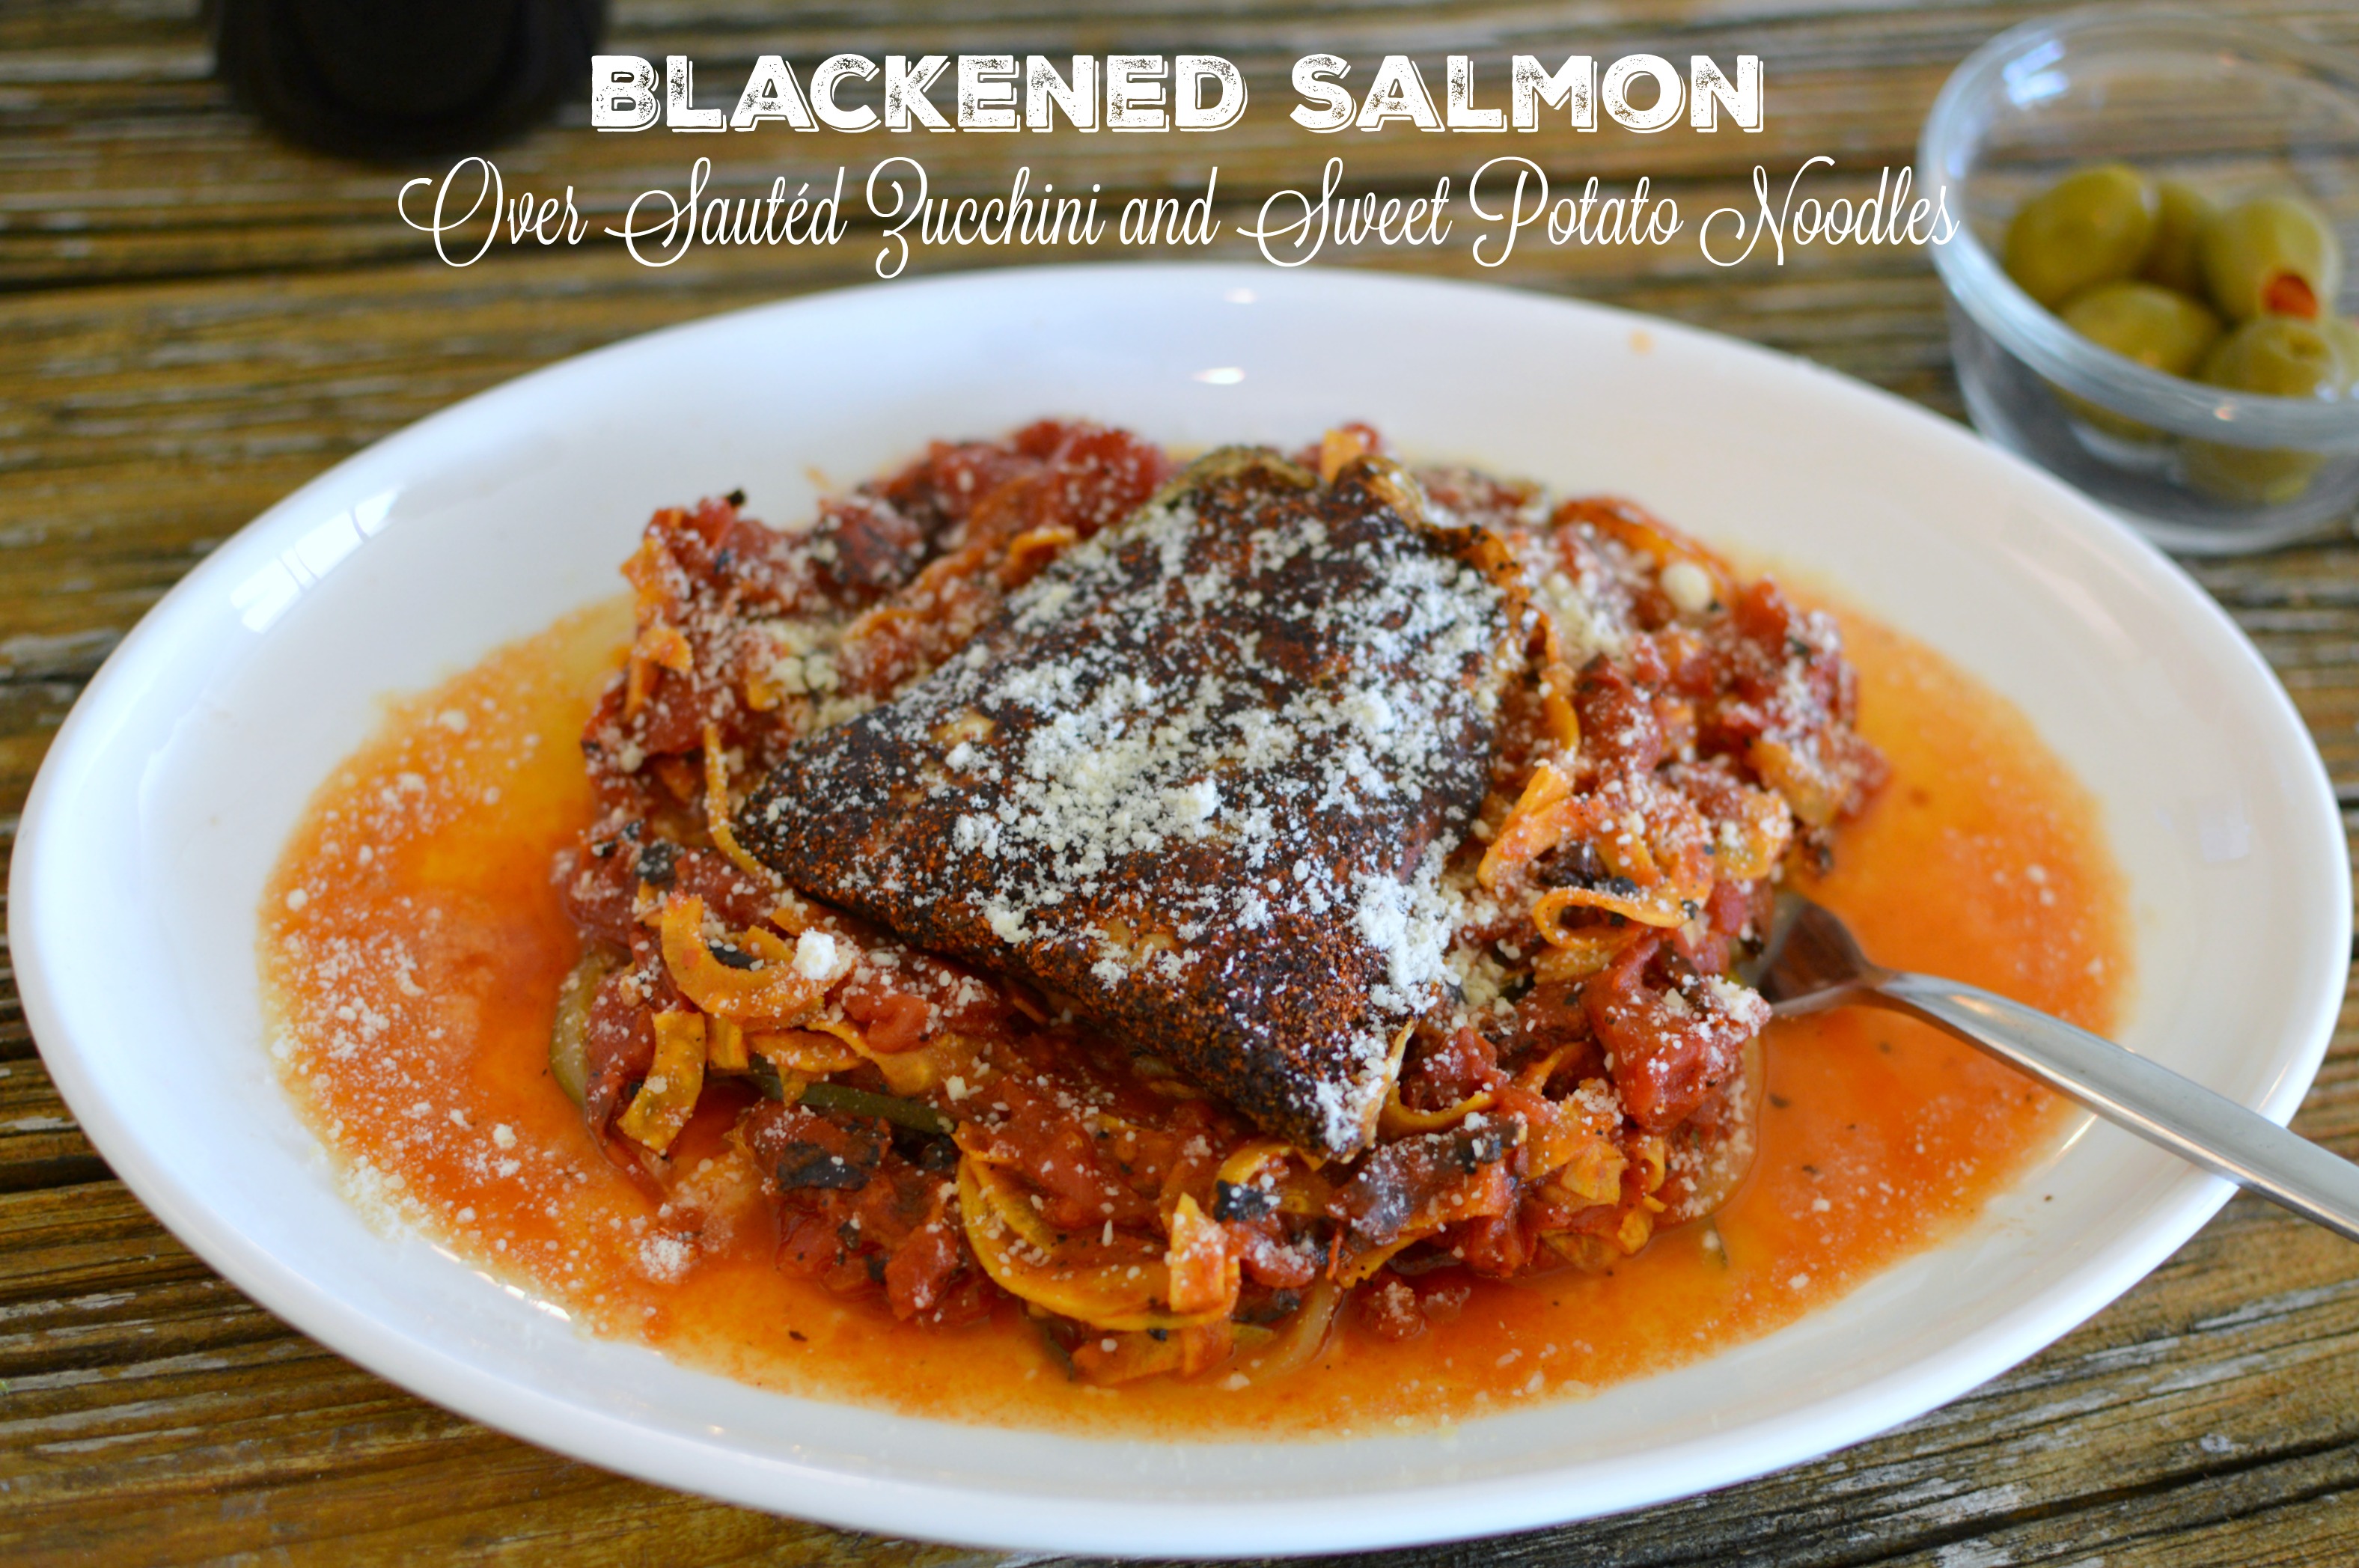 Healthy Blackened Salmon Dish with Sweet Potato Noodles